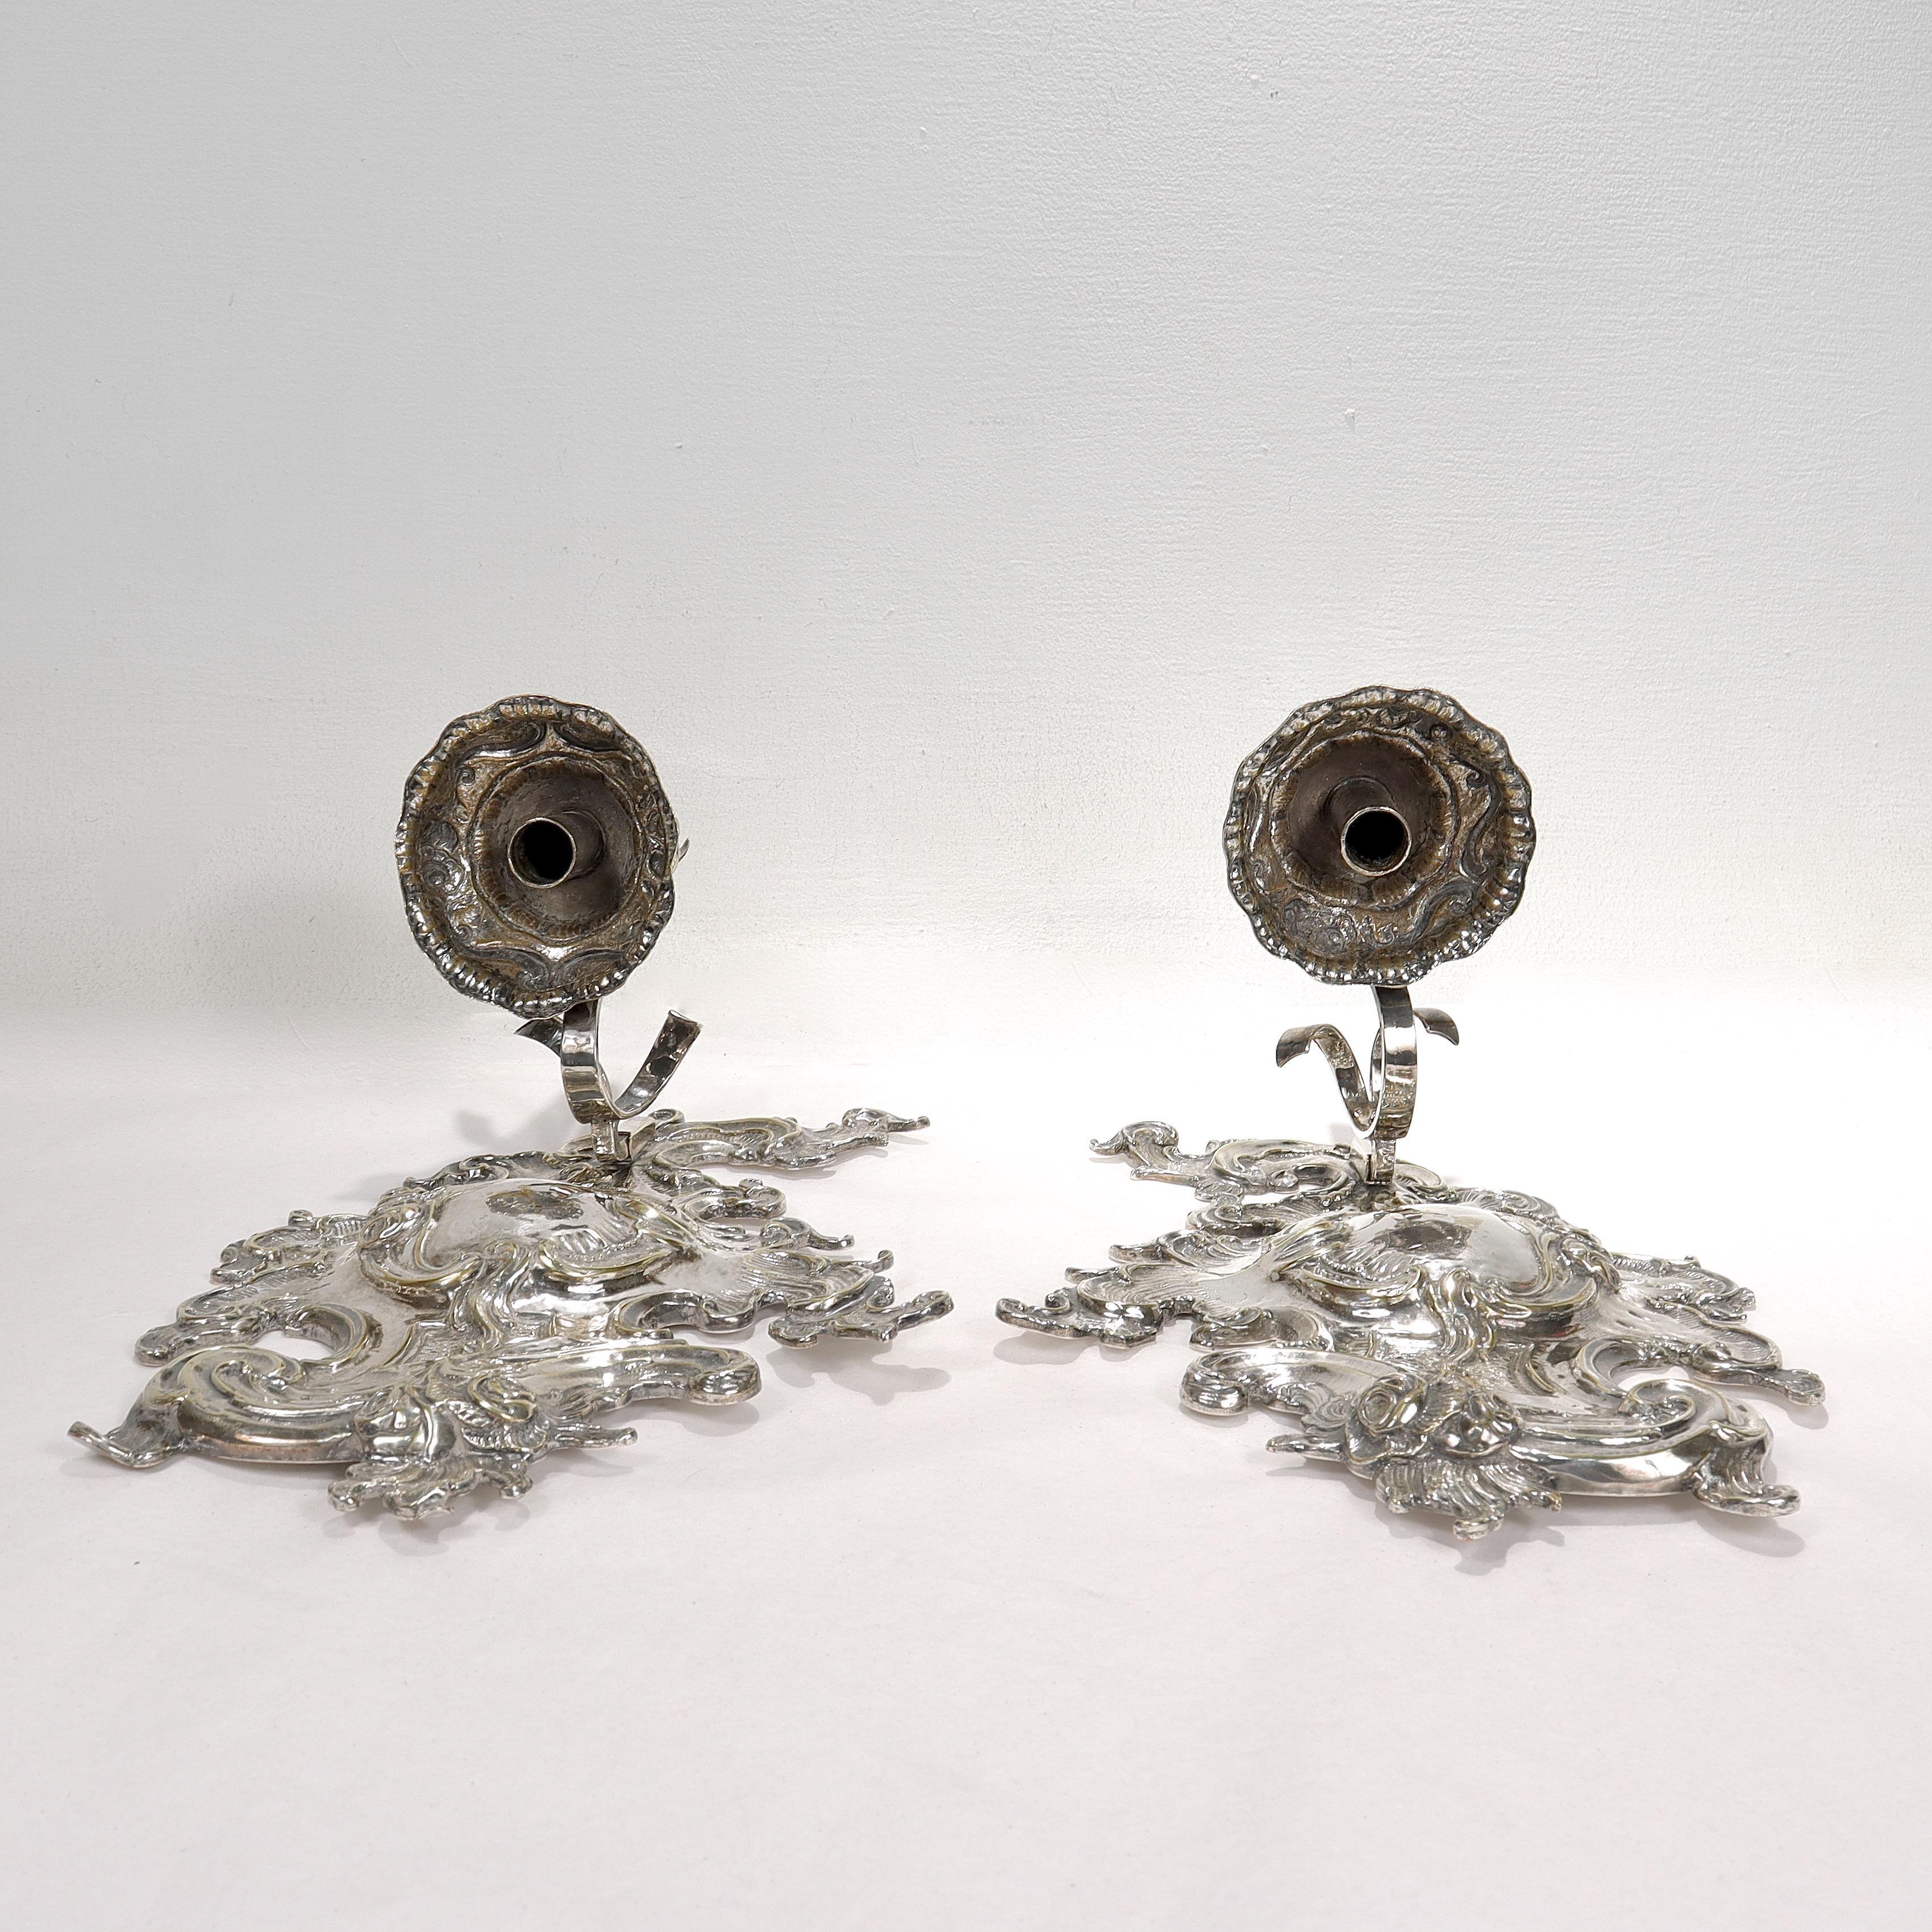 Antique Rococo or Rococo Revival Silver Plated Wall Sconces For Sale 10